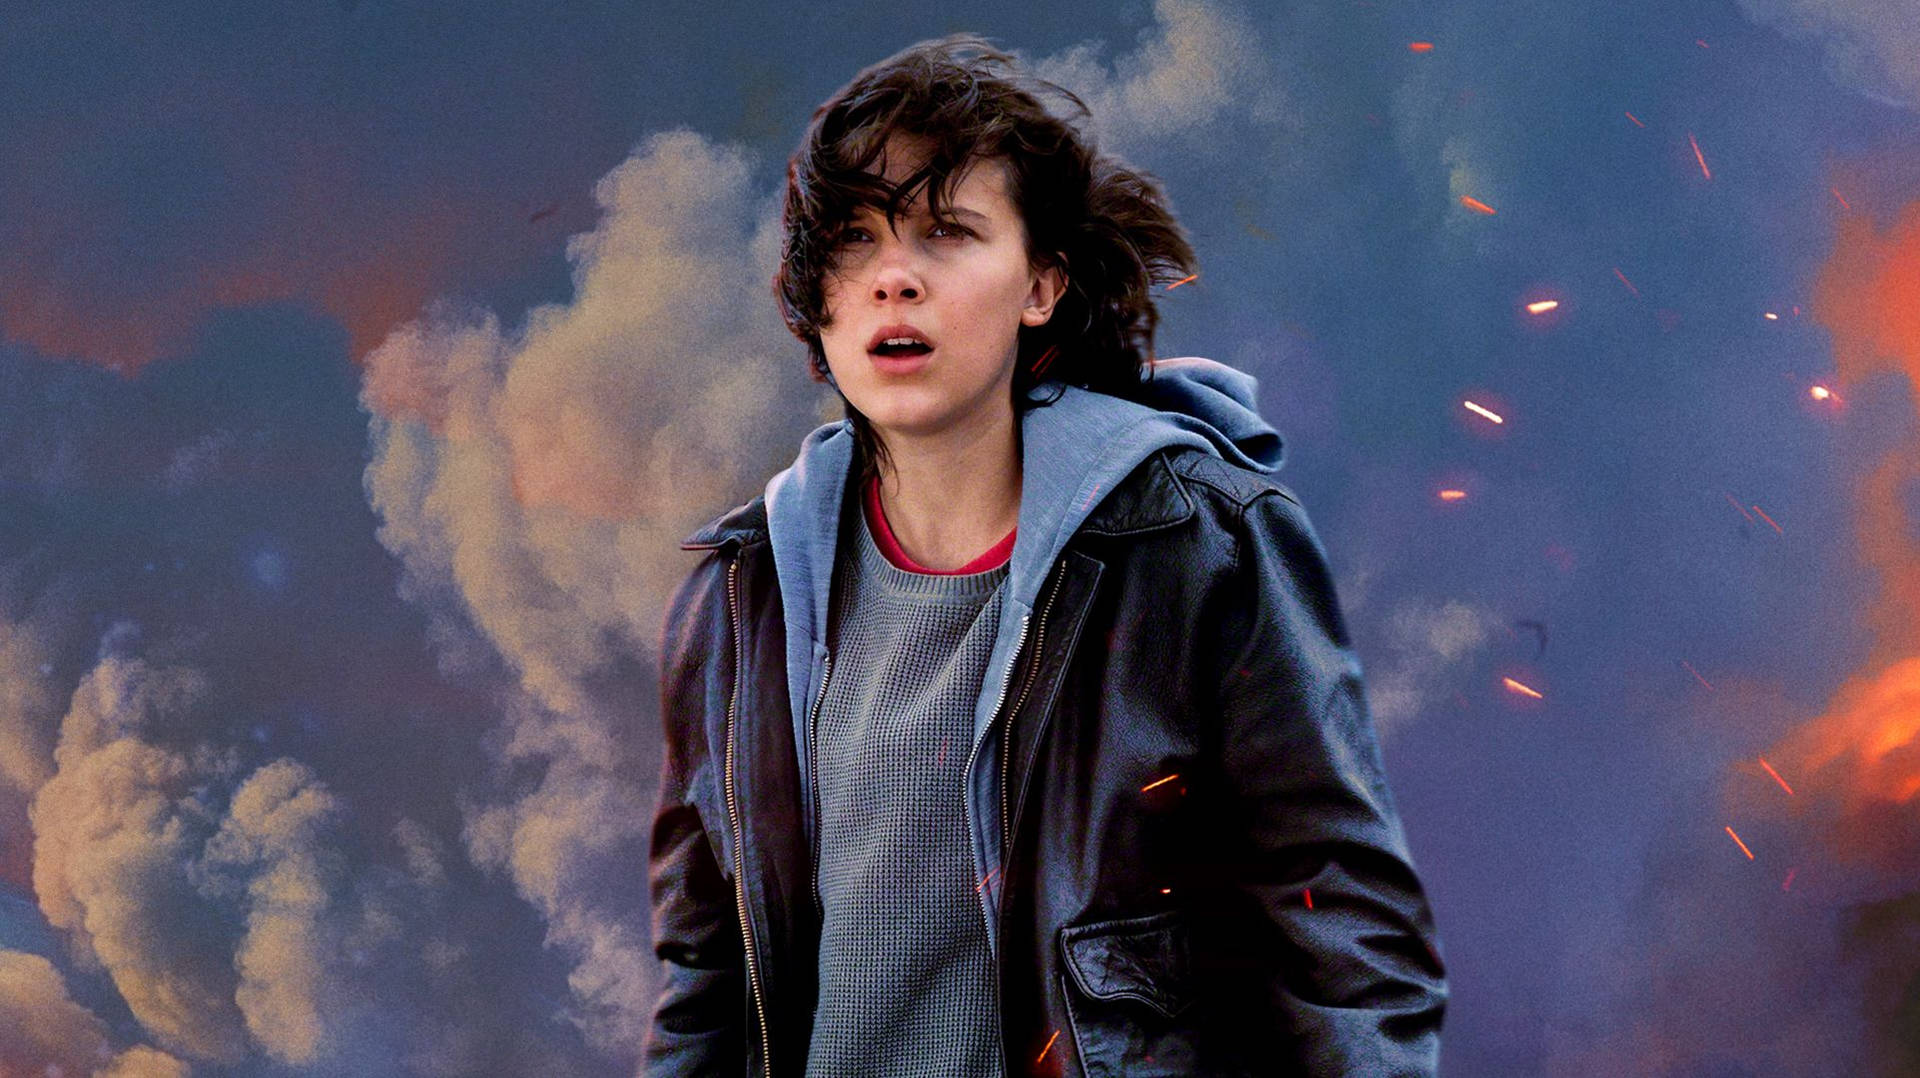 Millie Bobby Brown In Godzilla: King Of The Monsters Background